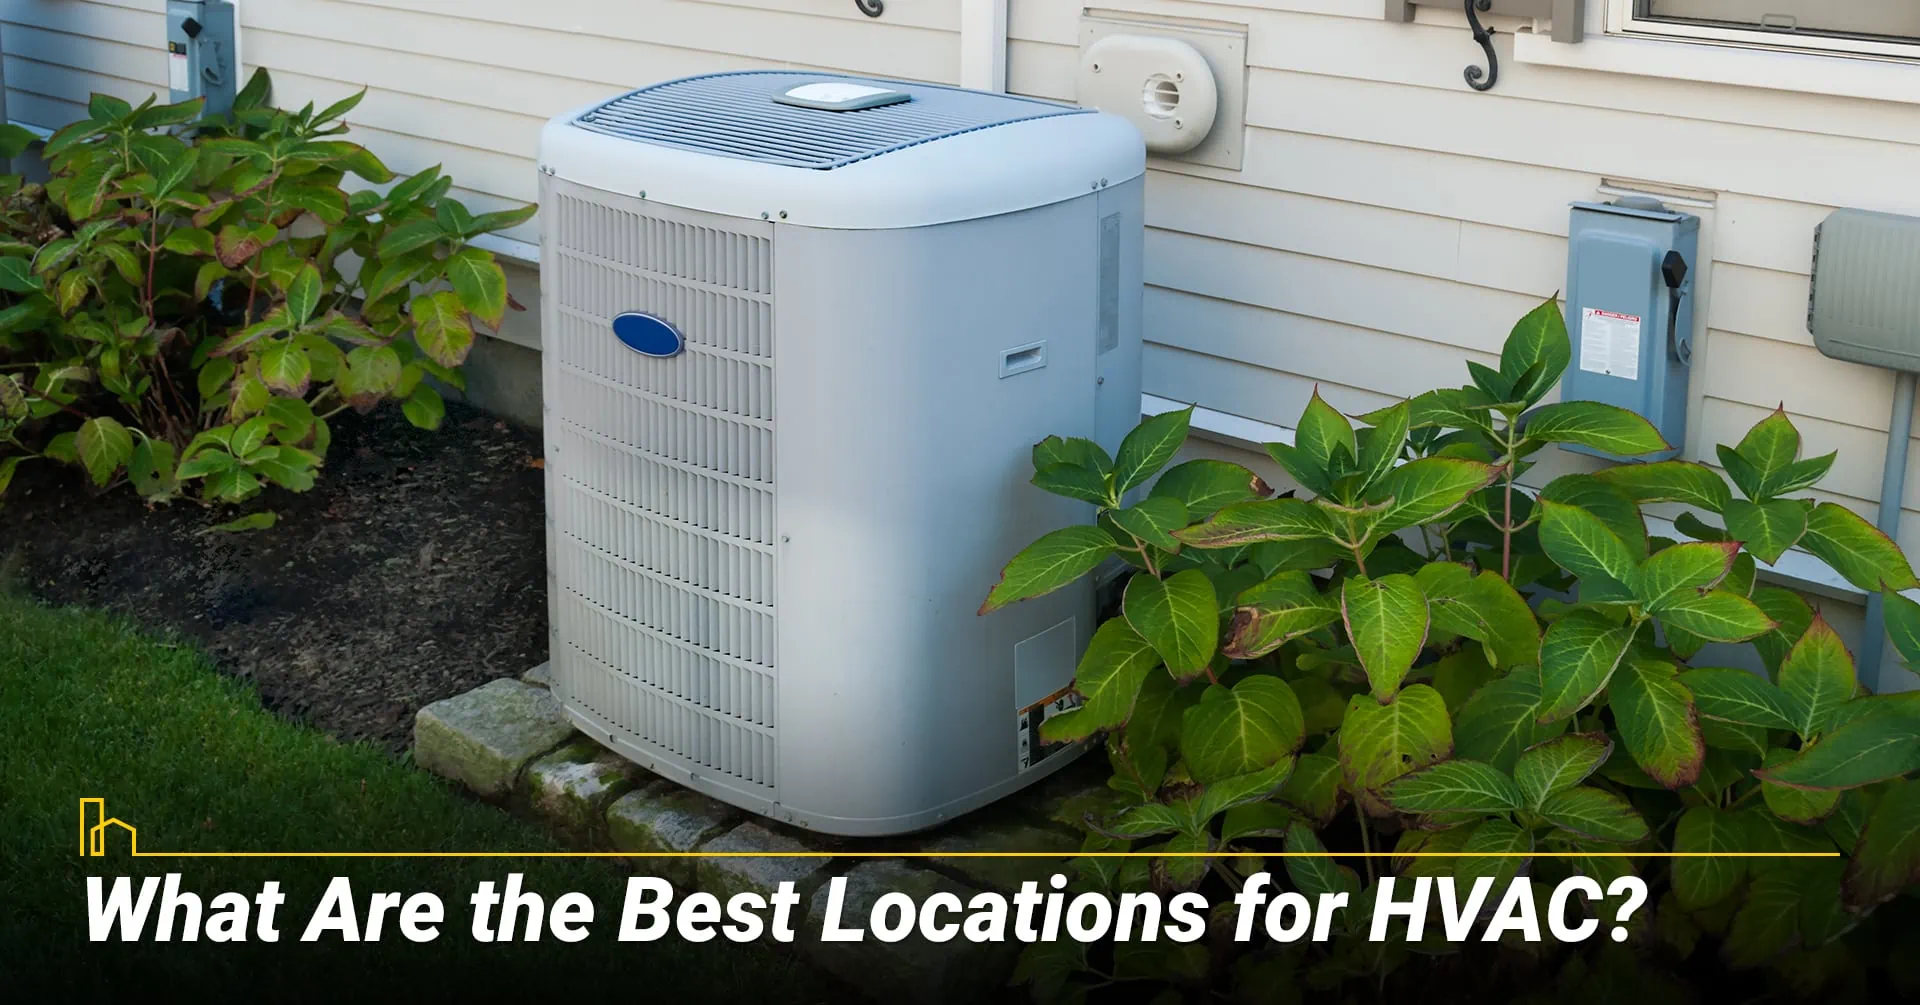 What Are the Best Locations for HVAC?